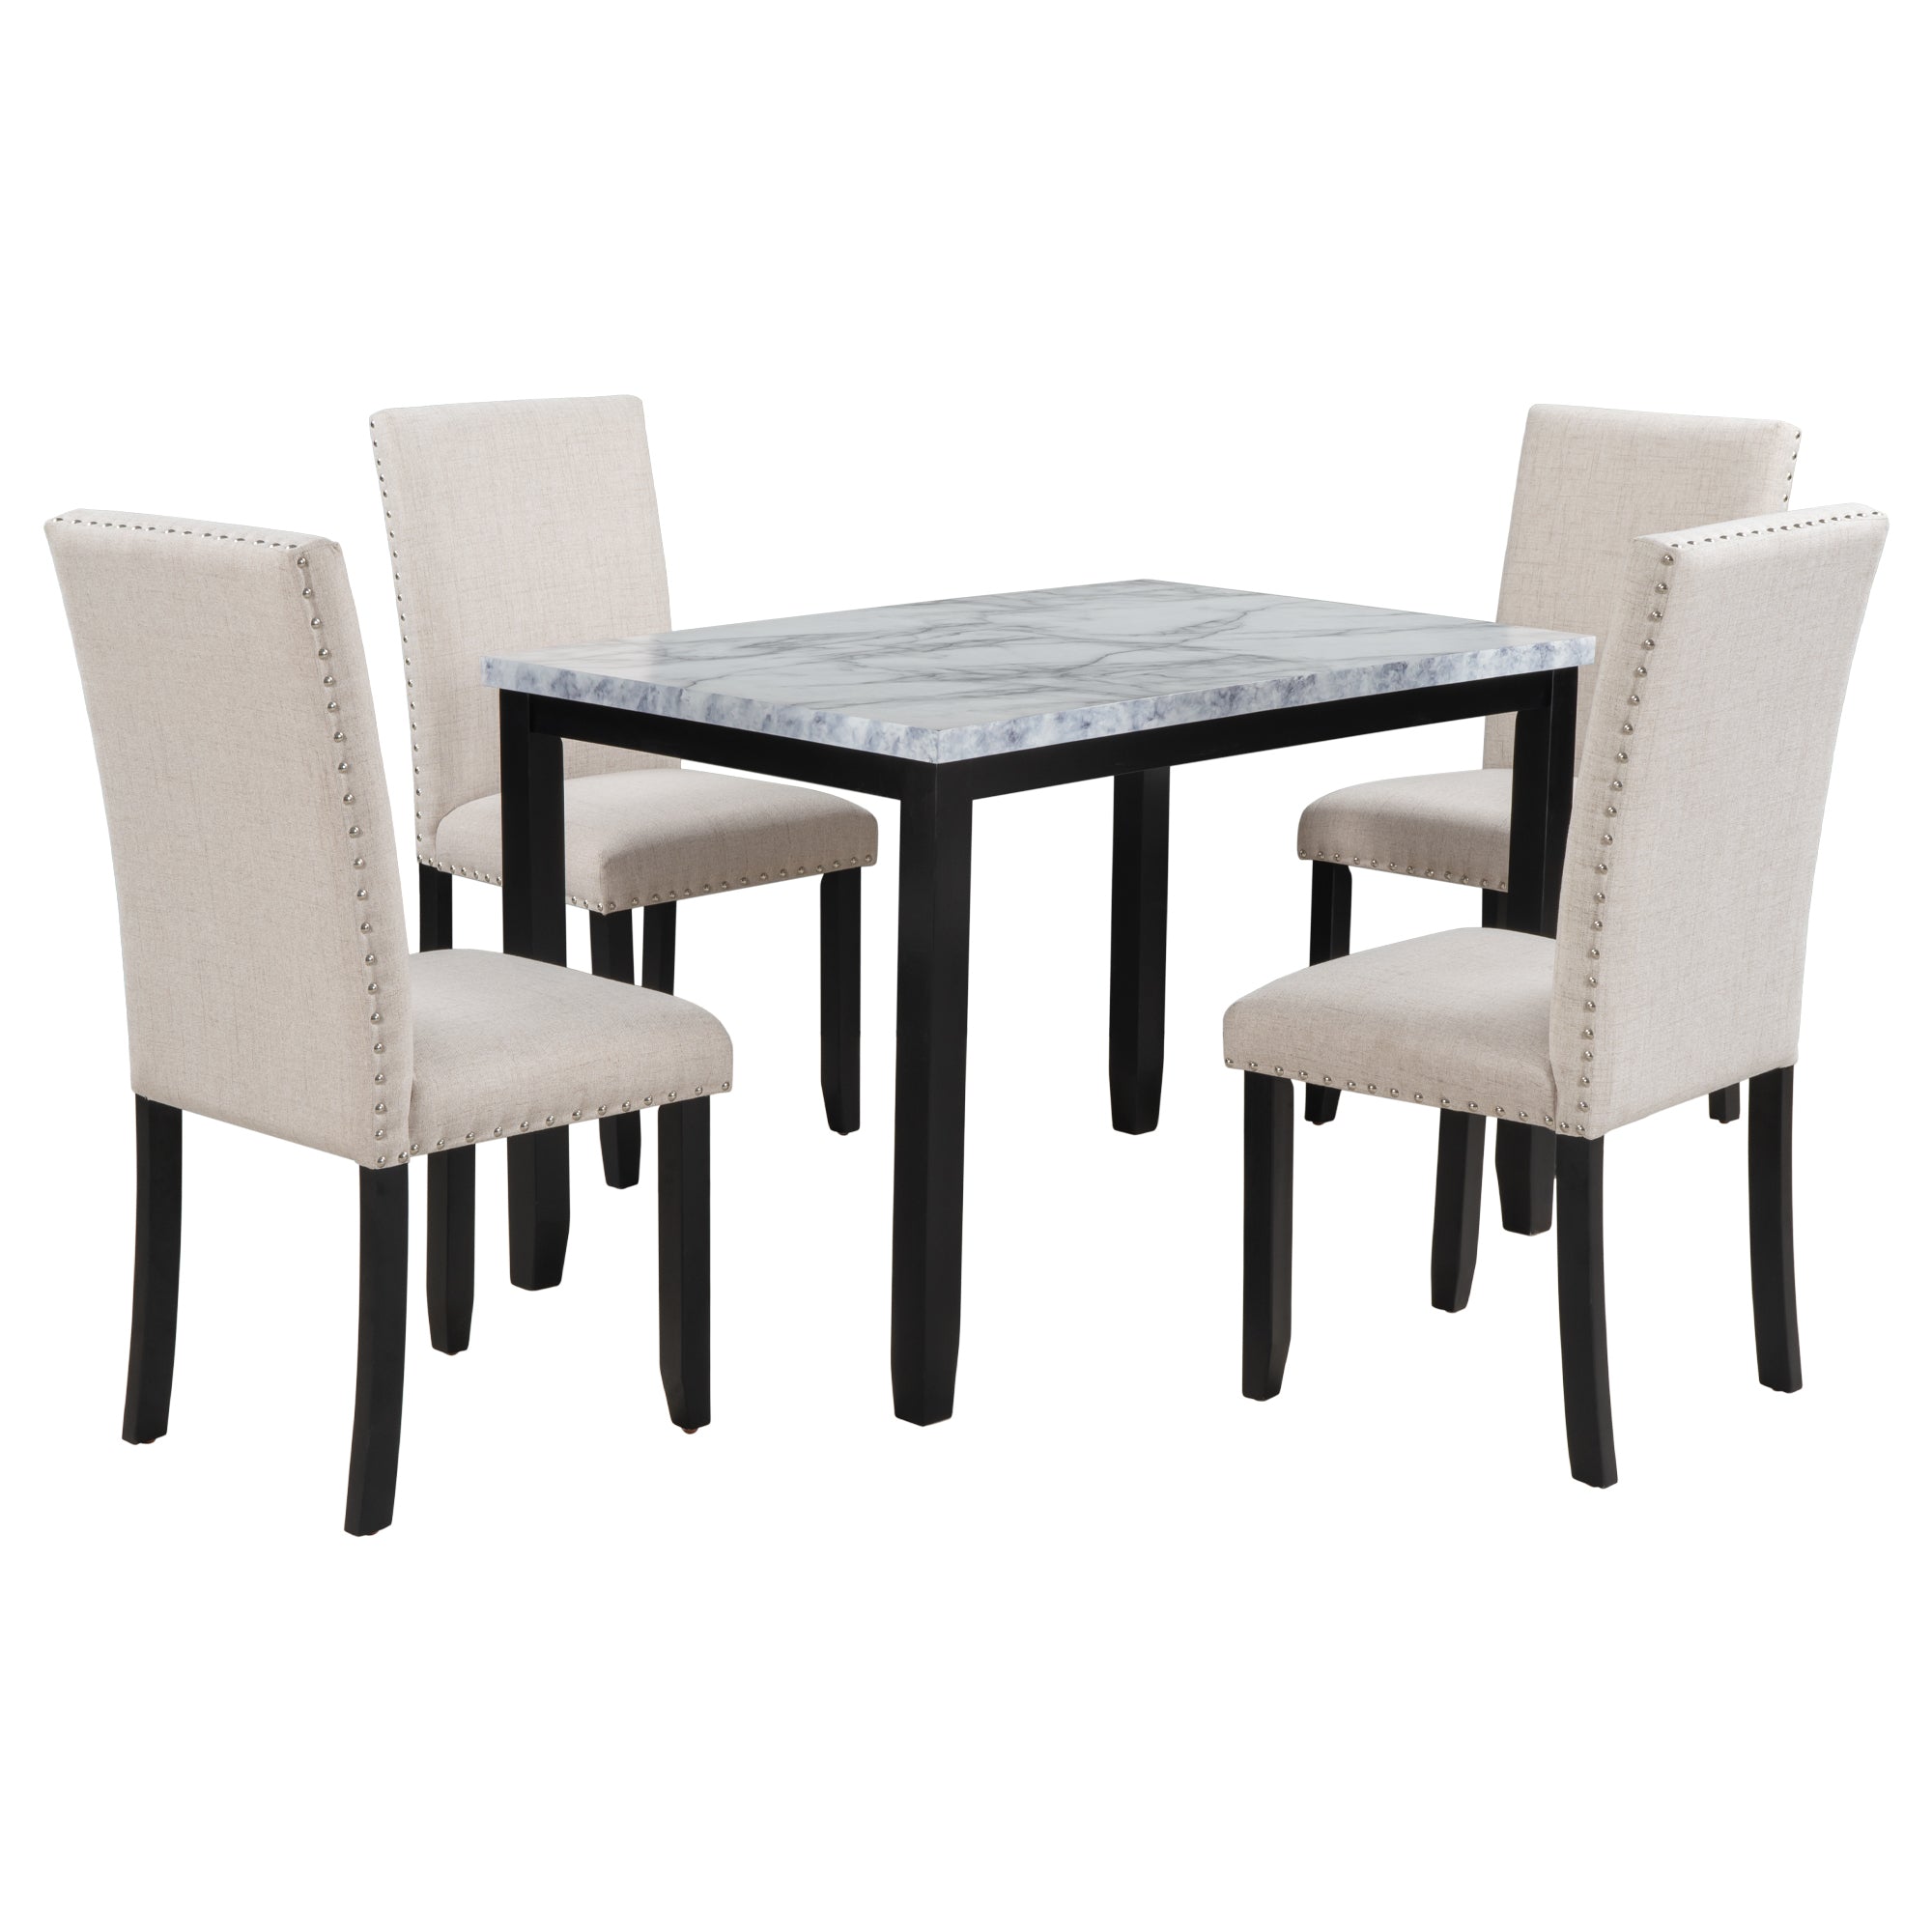 TREXM Faux Marble 5 Piece Dining Table with 4 Upholstered Dining Chairs Home (White/Beige+Black)